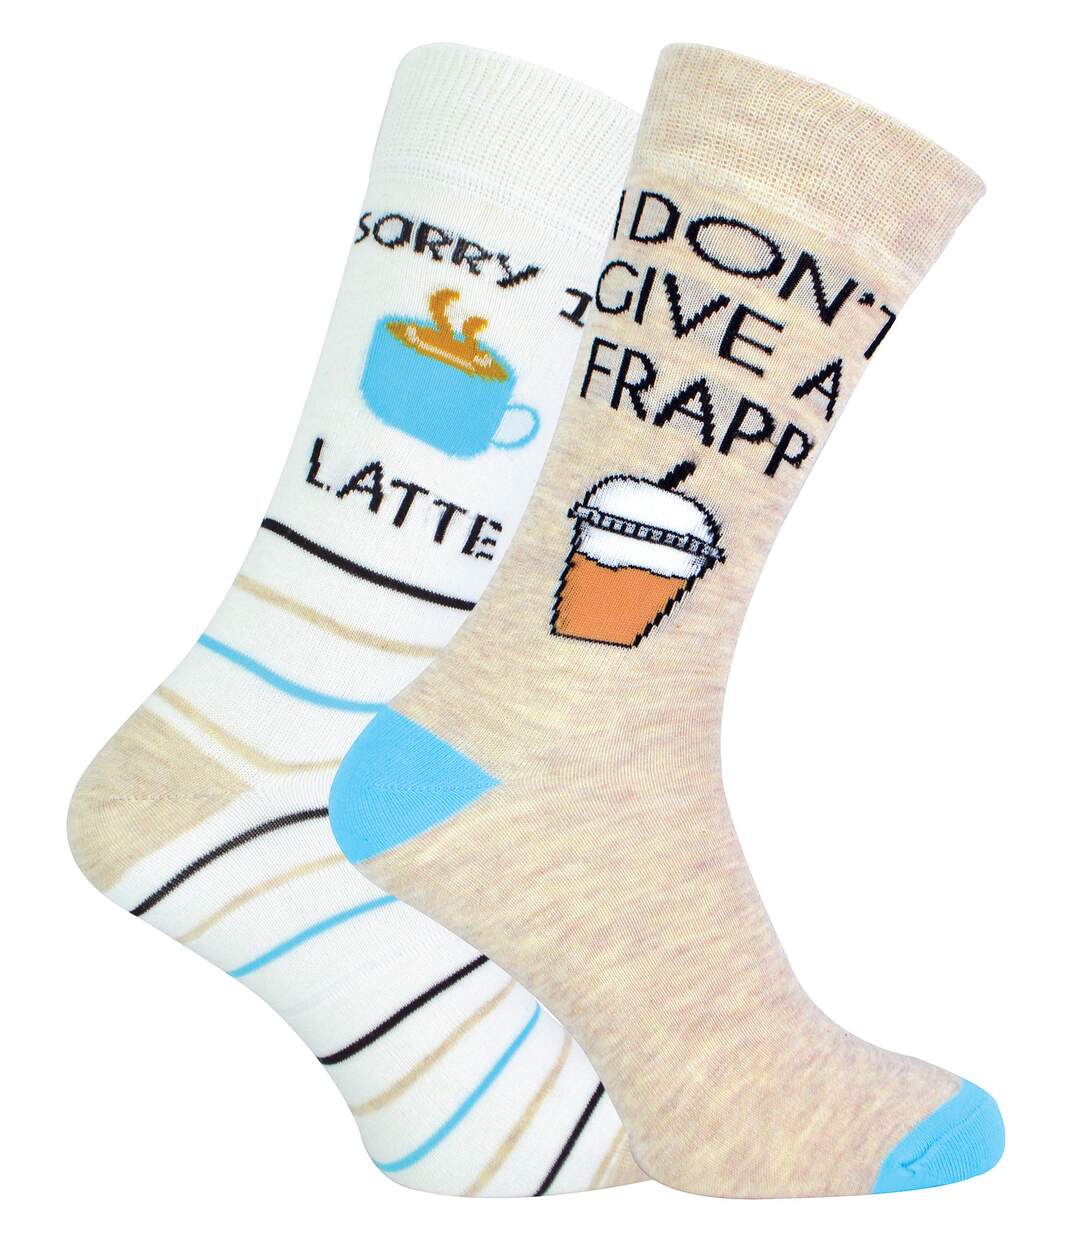 Novelty Coffee Socks in a Gift Box | 2 Pairs | Cotton | Urban Eccentric